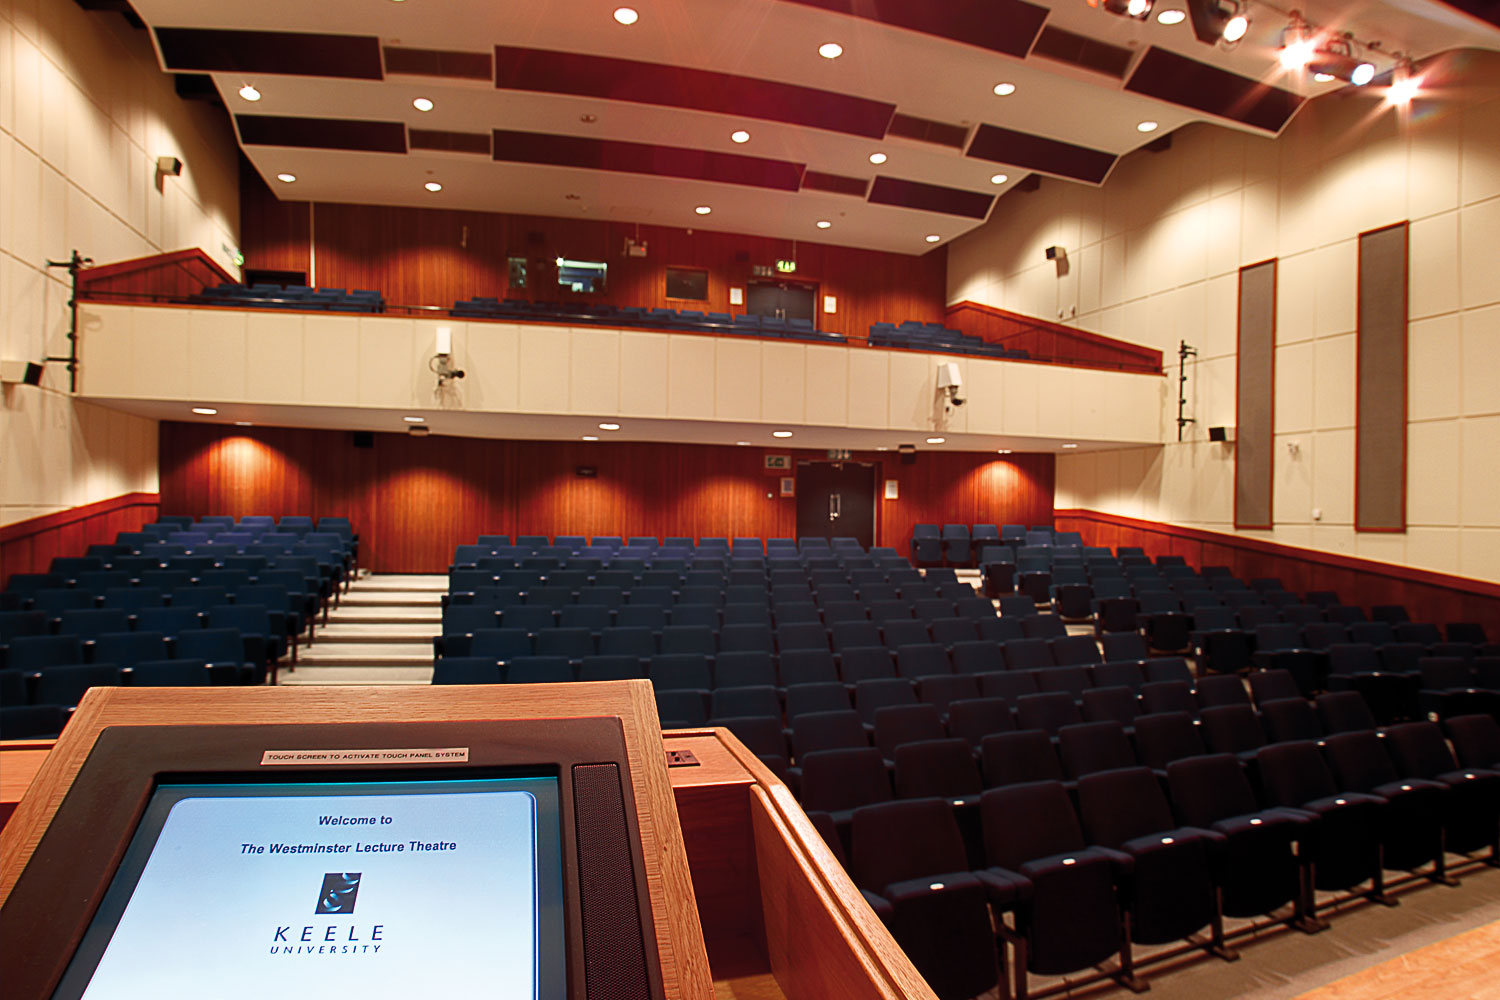 Keele University, Westminister Theatre Lecturn